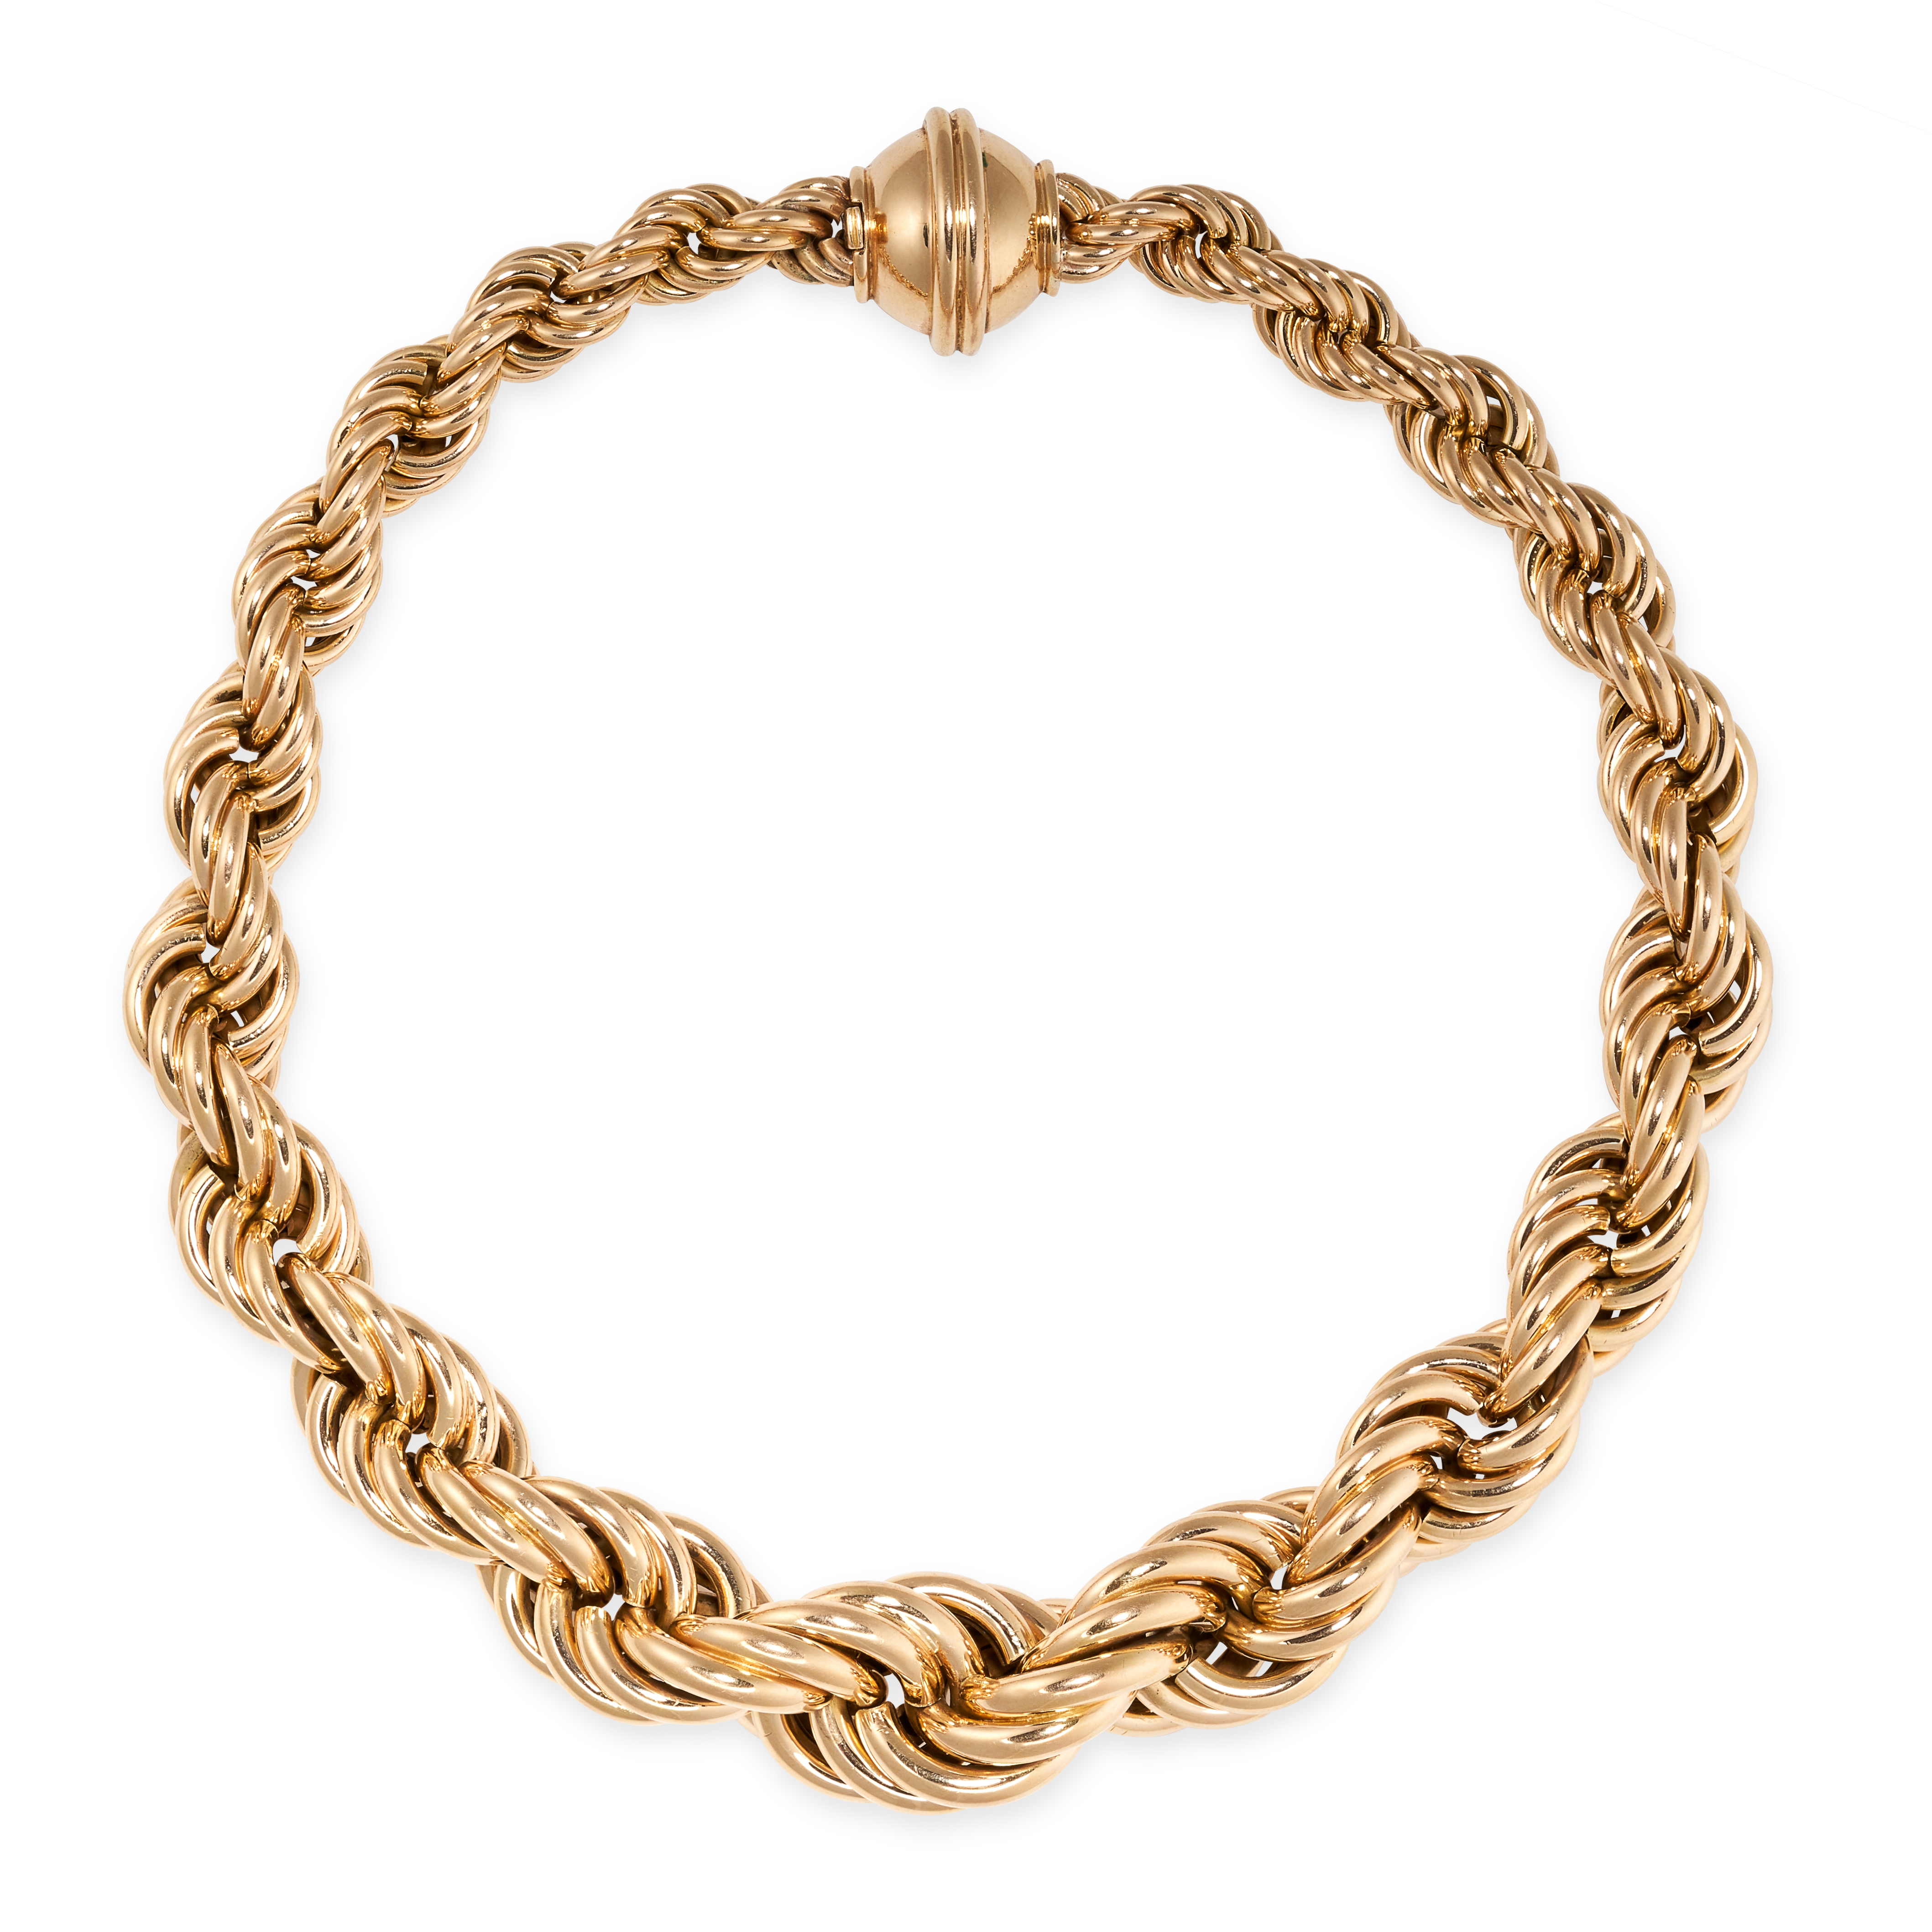 A VINTAGE COLLAR NECKLACE, HERMES in 18ct yellow gold, designed as a series of twisting fancy